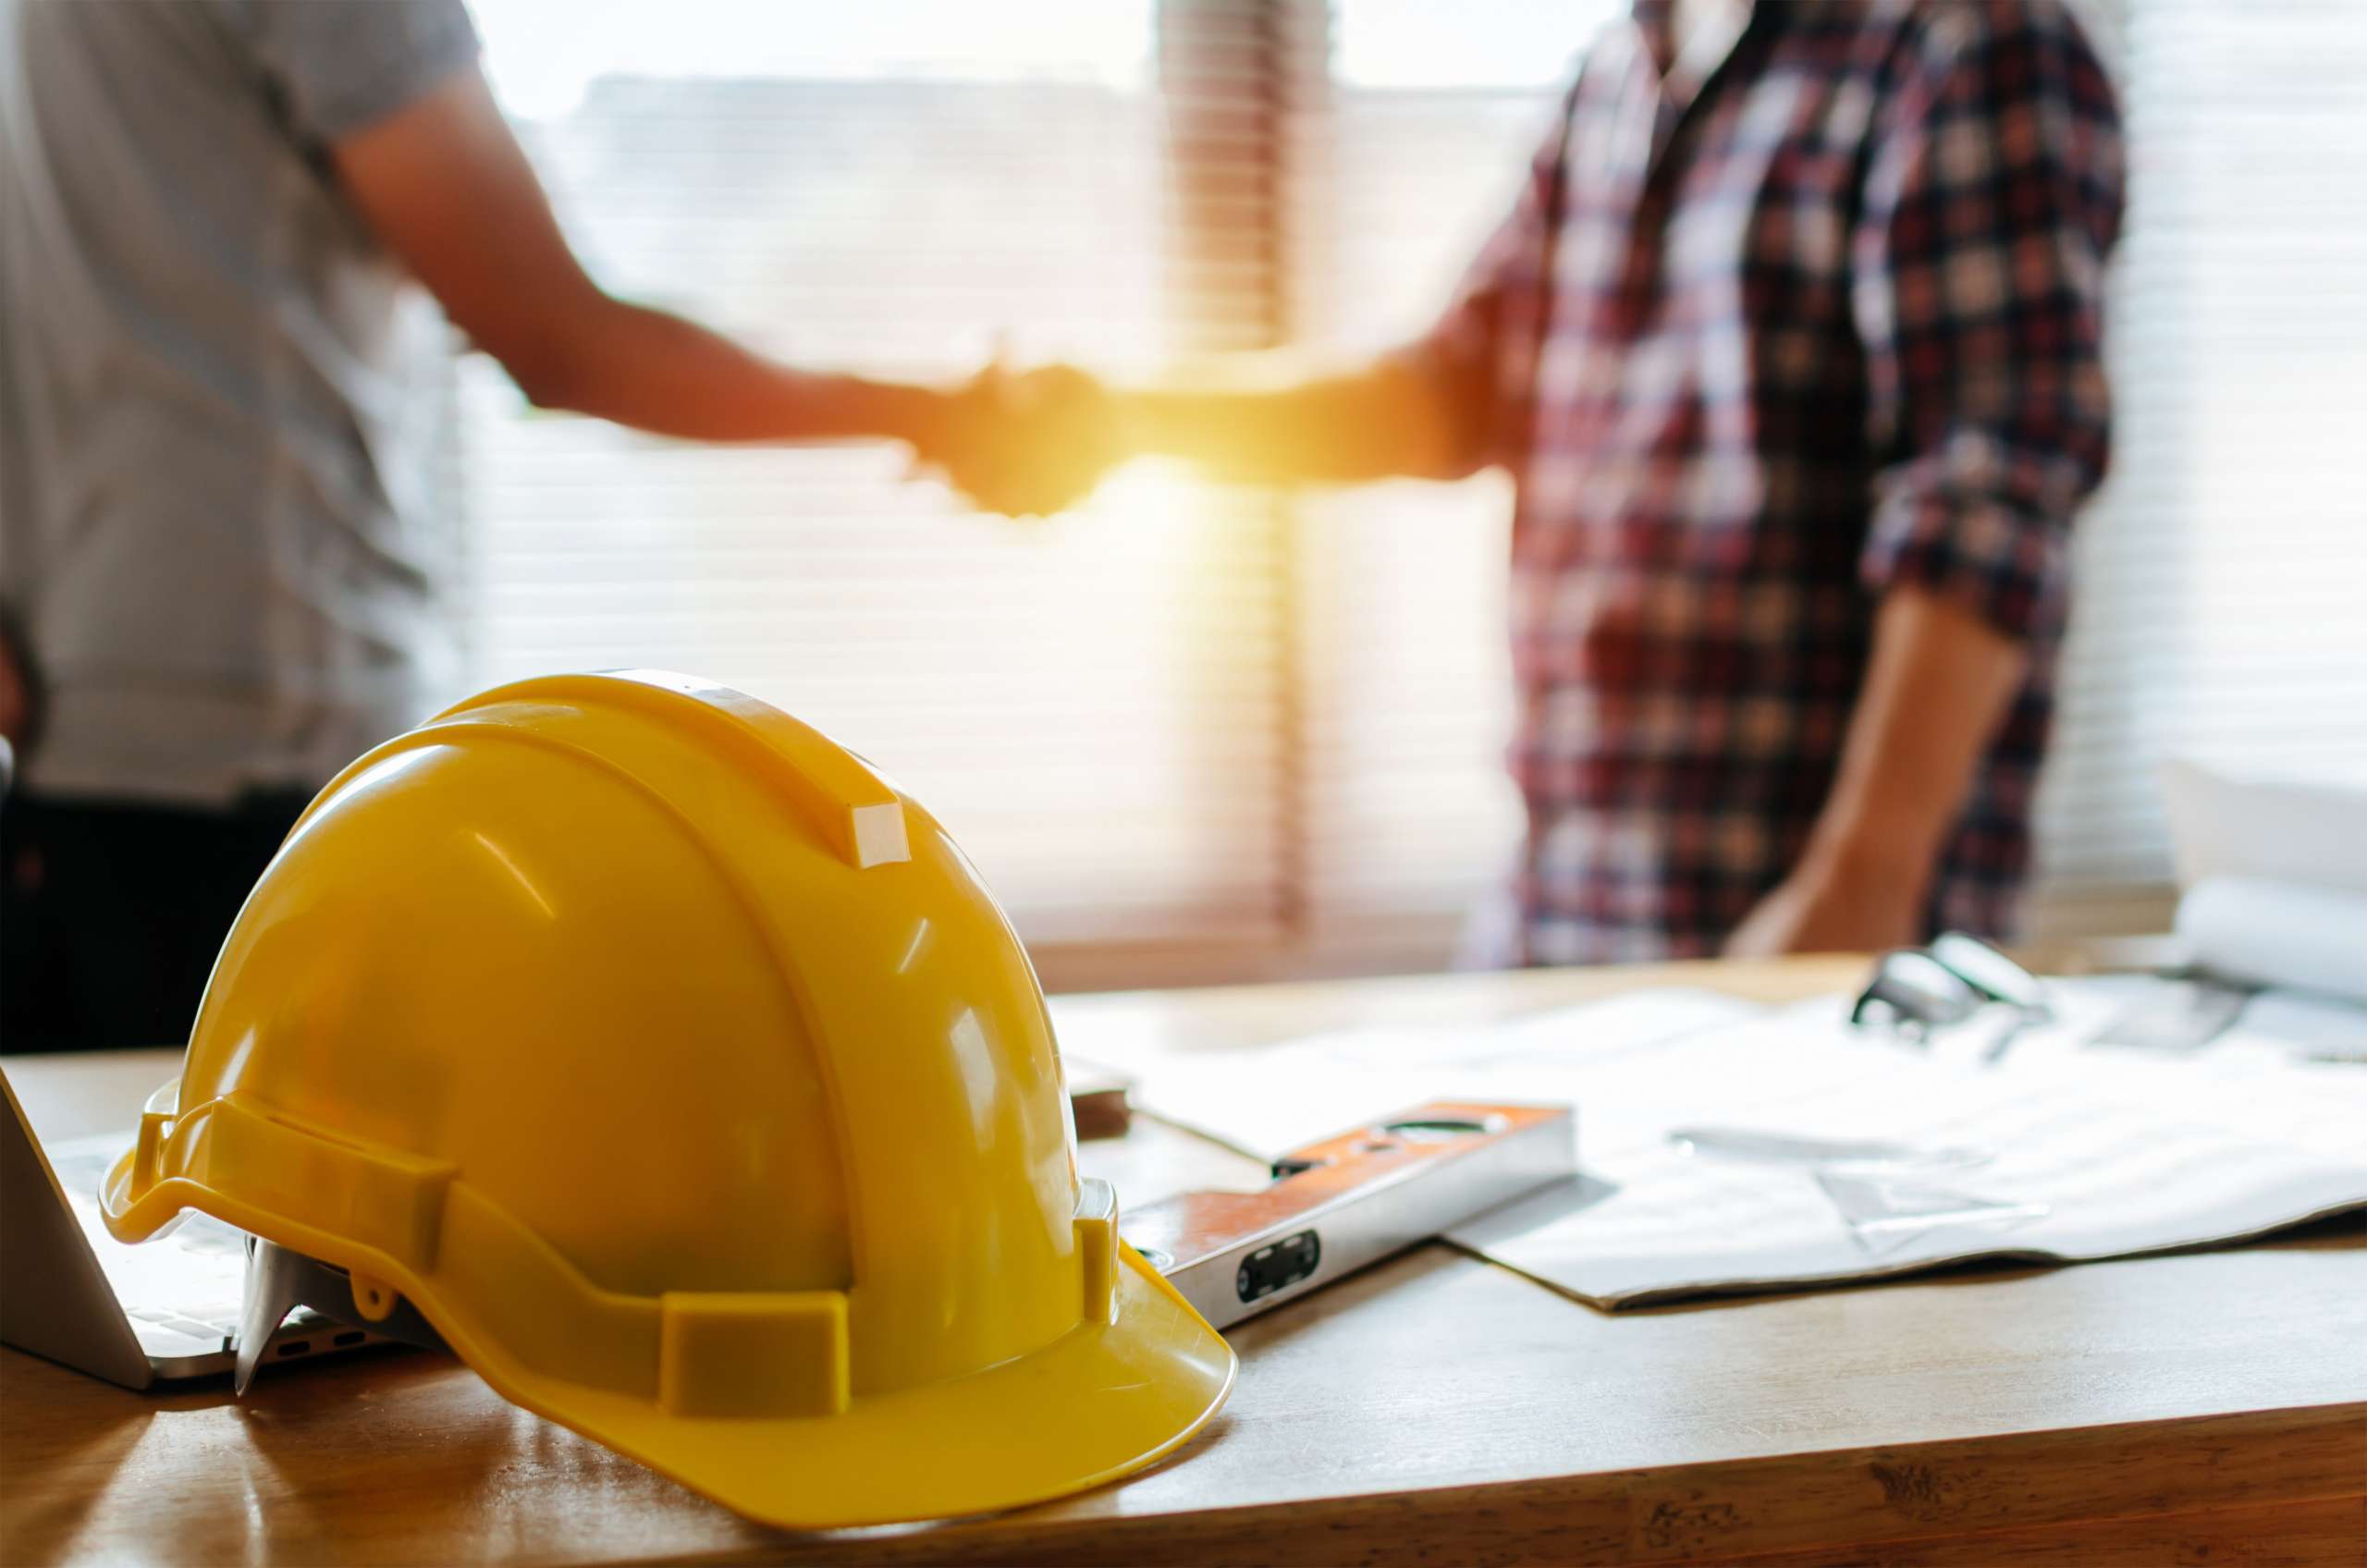 Consutruction contractor shakes hand in an office with yellow safety helmet to start up a business.